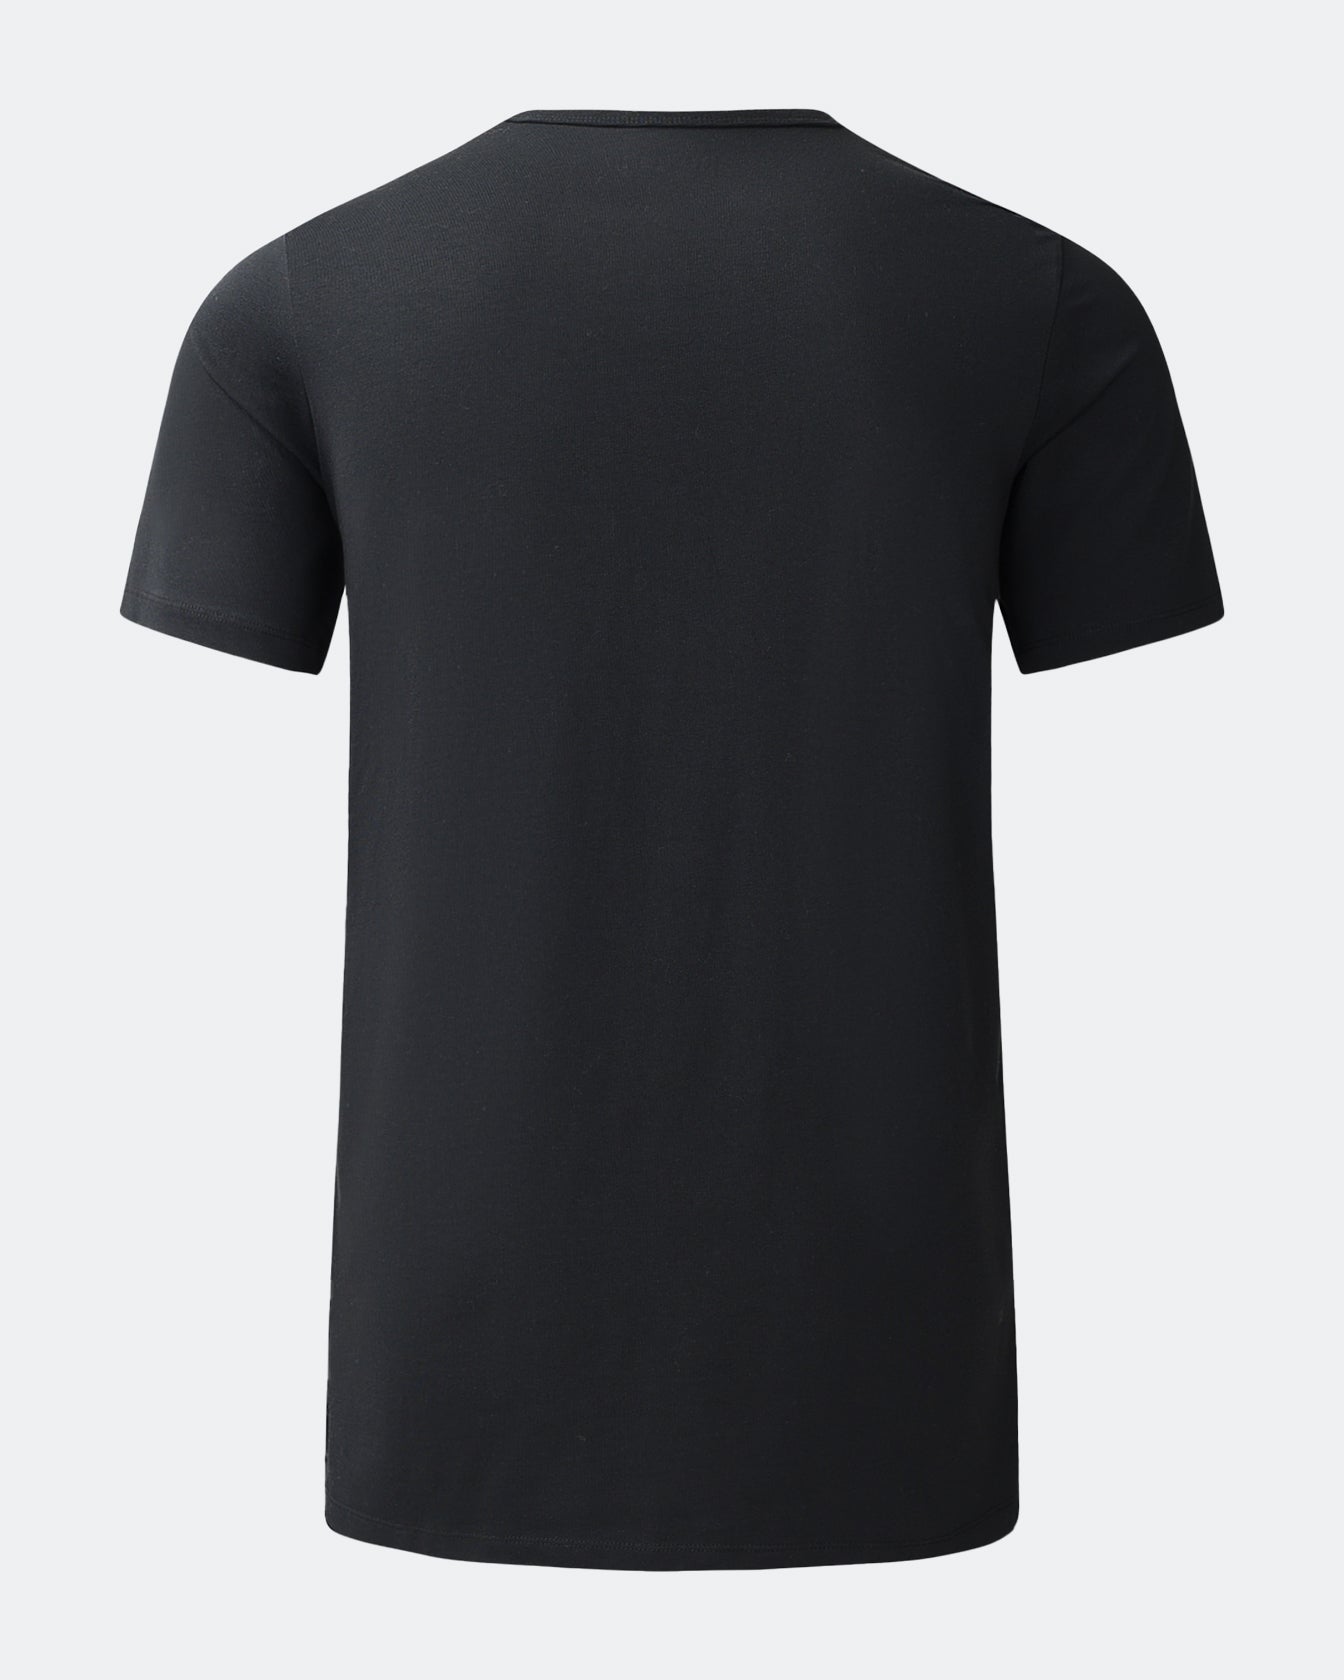 Spectacle 2.0 Black T-Shirt